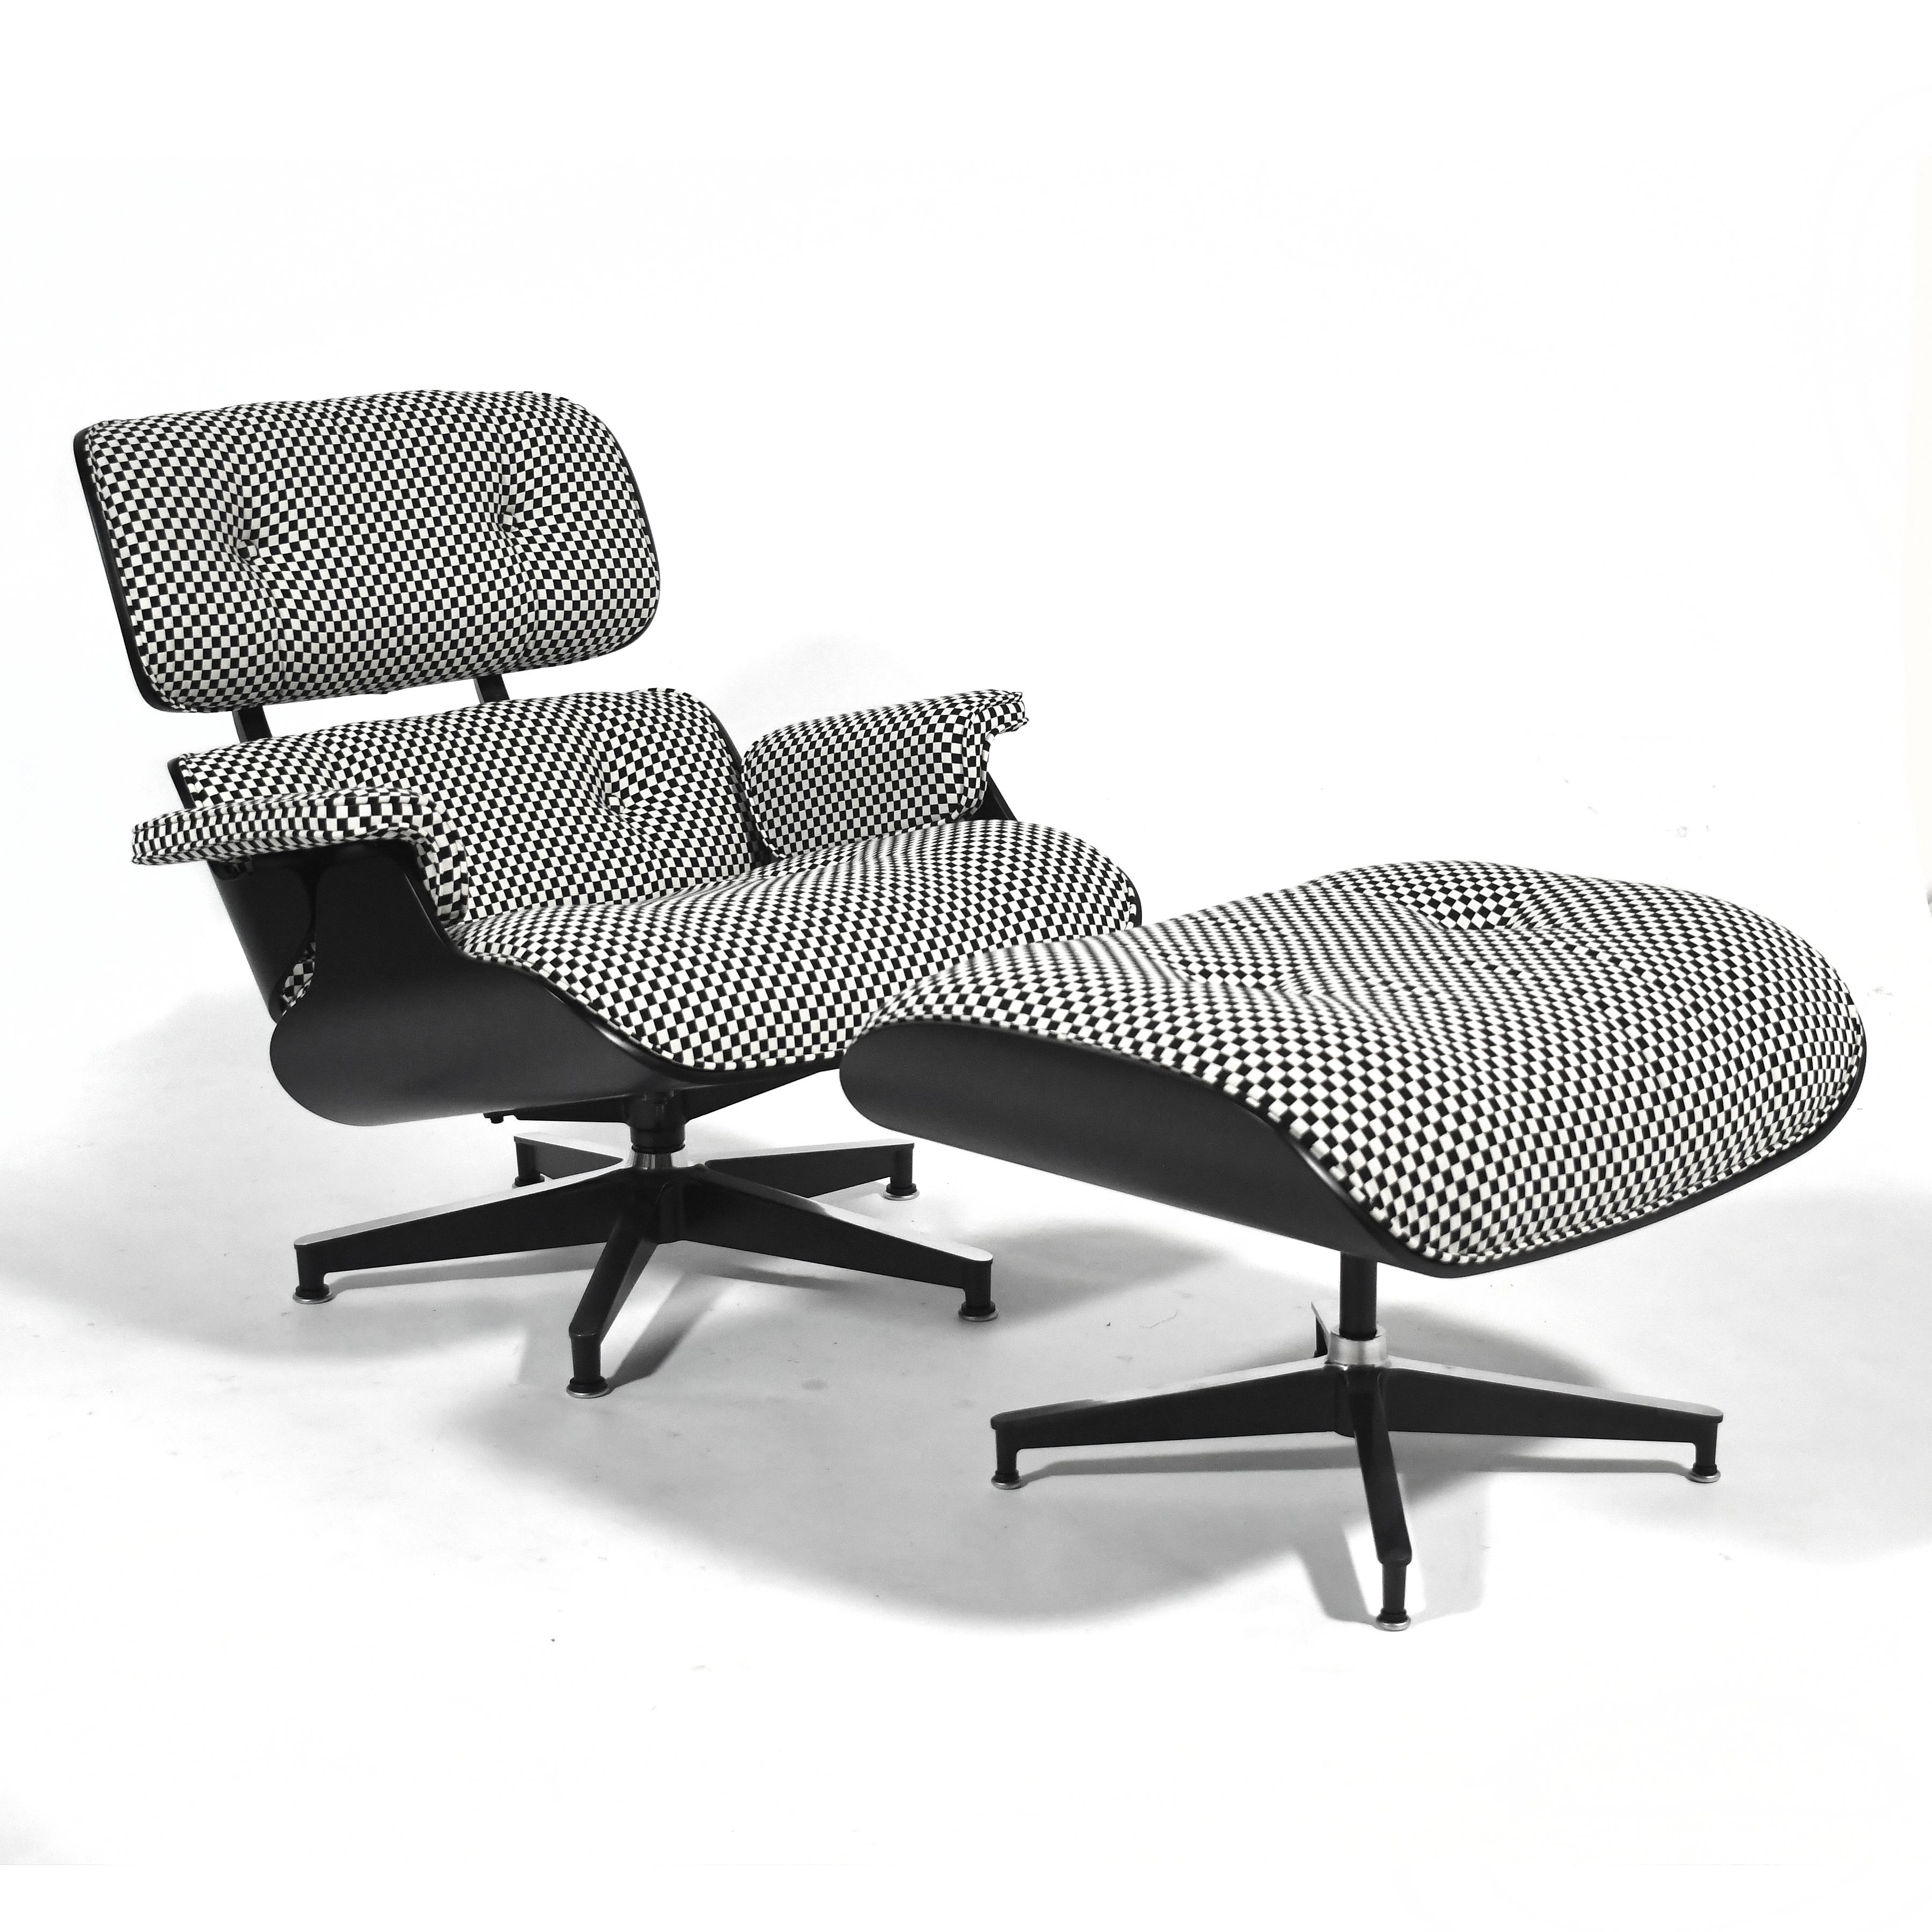 This spectacular example of the iconic Eames lounge chair is an authentic piece made by Herman Miller. They only recently began offering the chair in this configuration. In fact, this particular chair was the first one they made and was used by